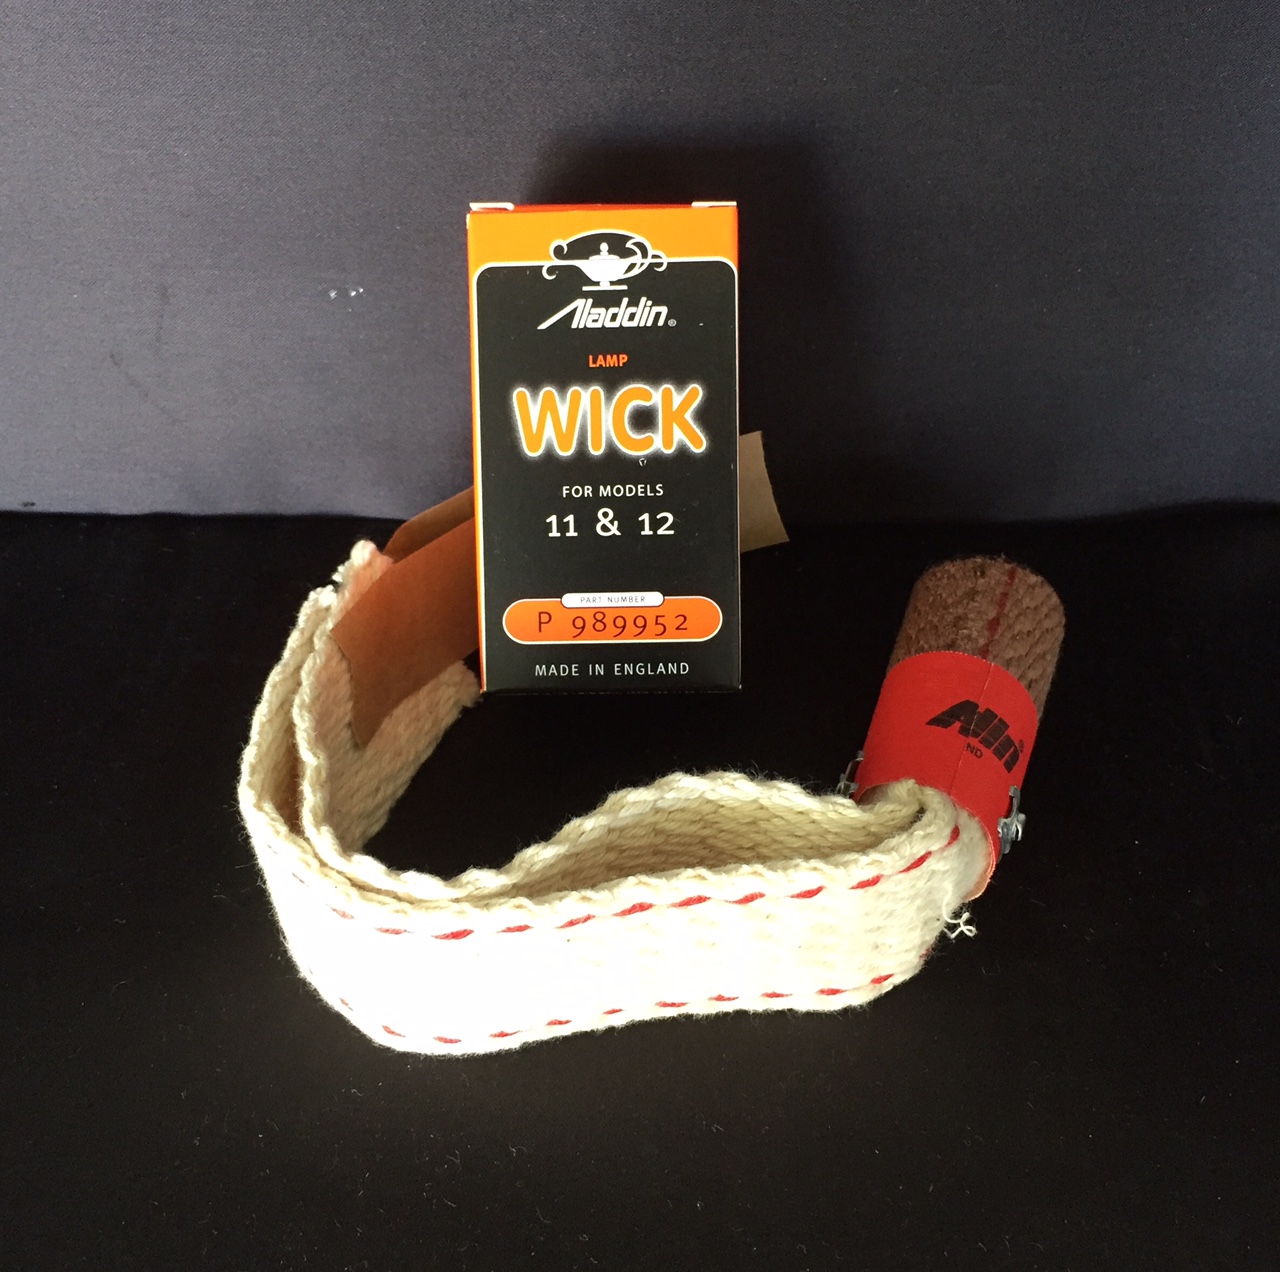 Aladdin Lamp Wick for Models 7, 8, 9, 10, 11 & 12 Burners. Part # N198 -  Imperial Lighting Co.